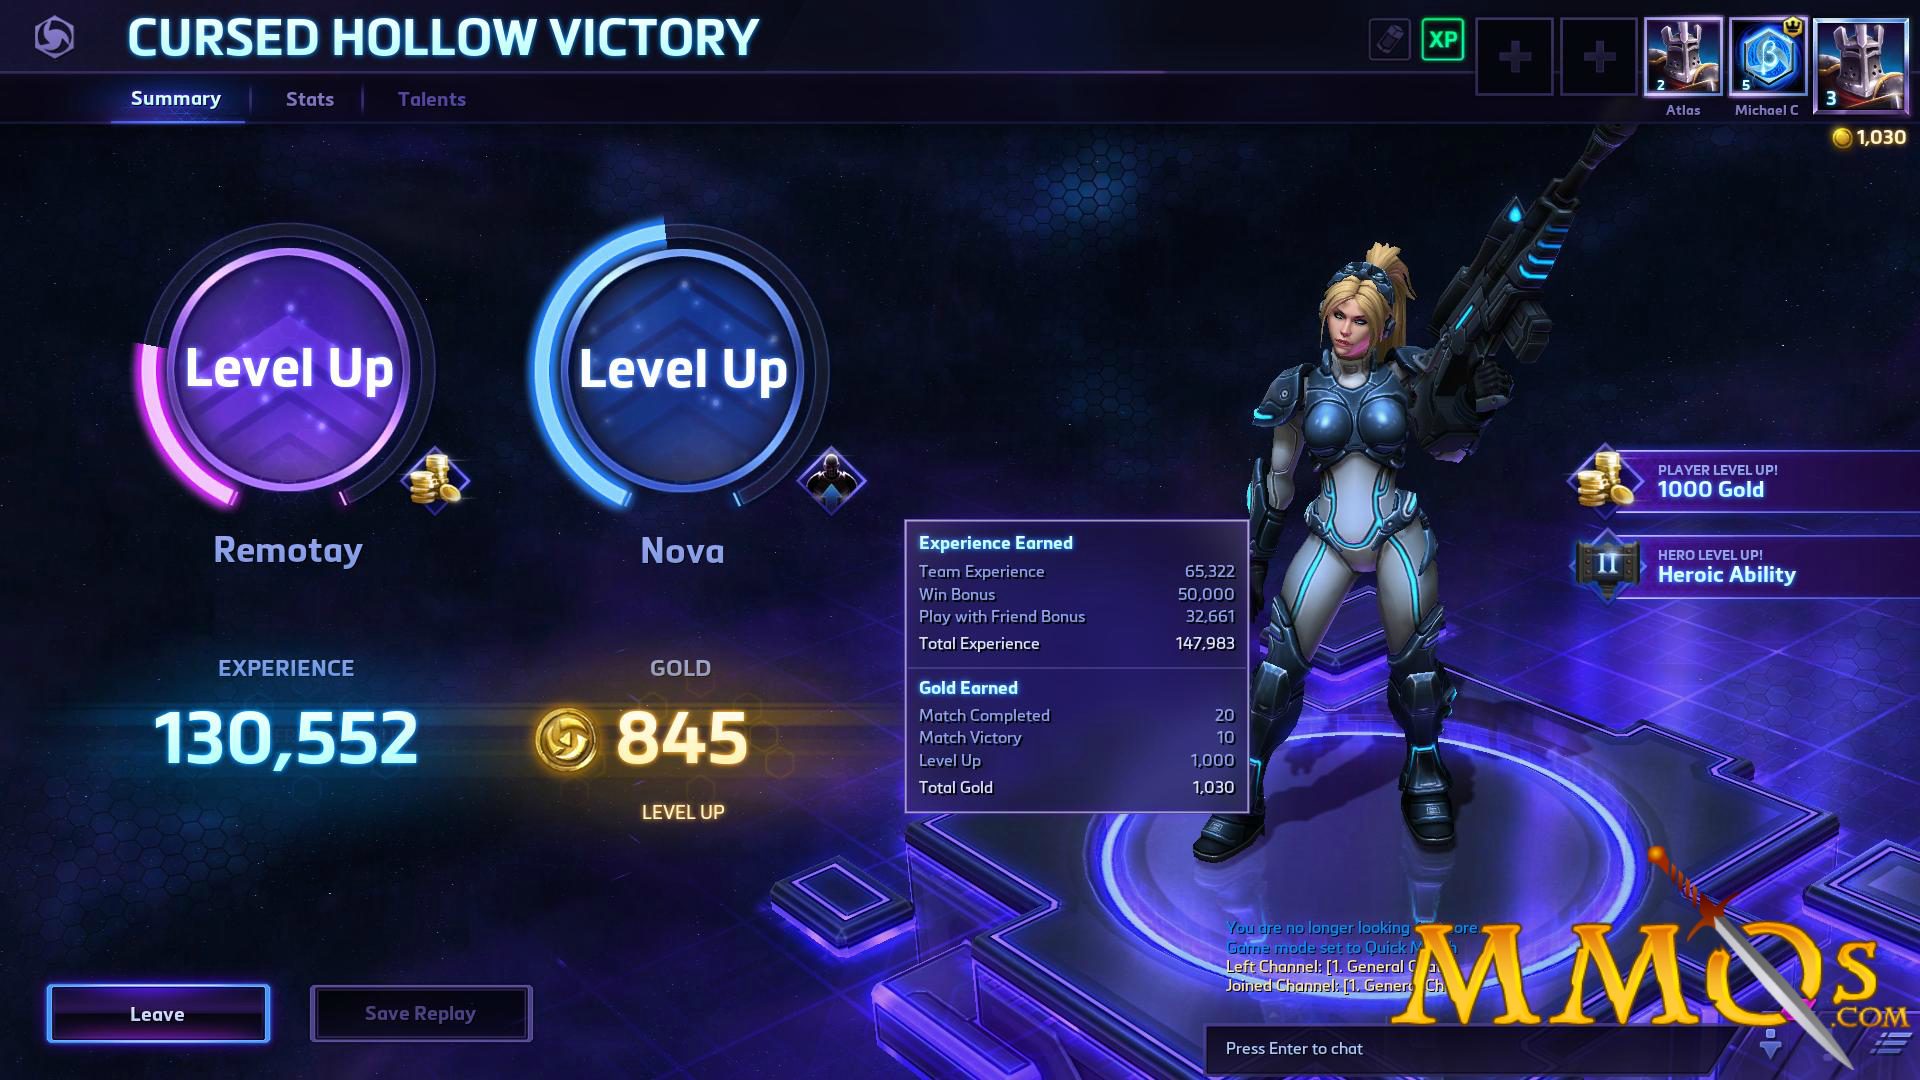 How to win in Heroes of the Storm - post - Imgur